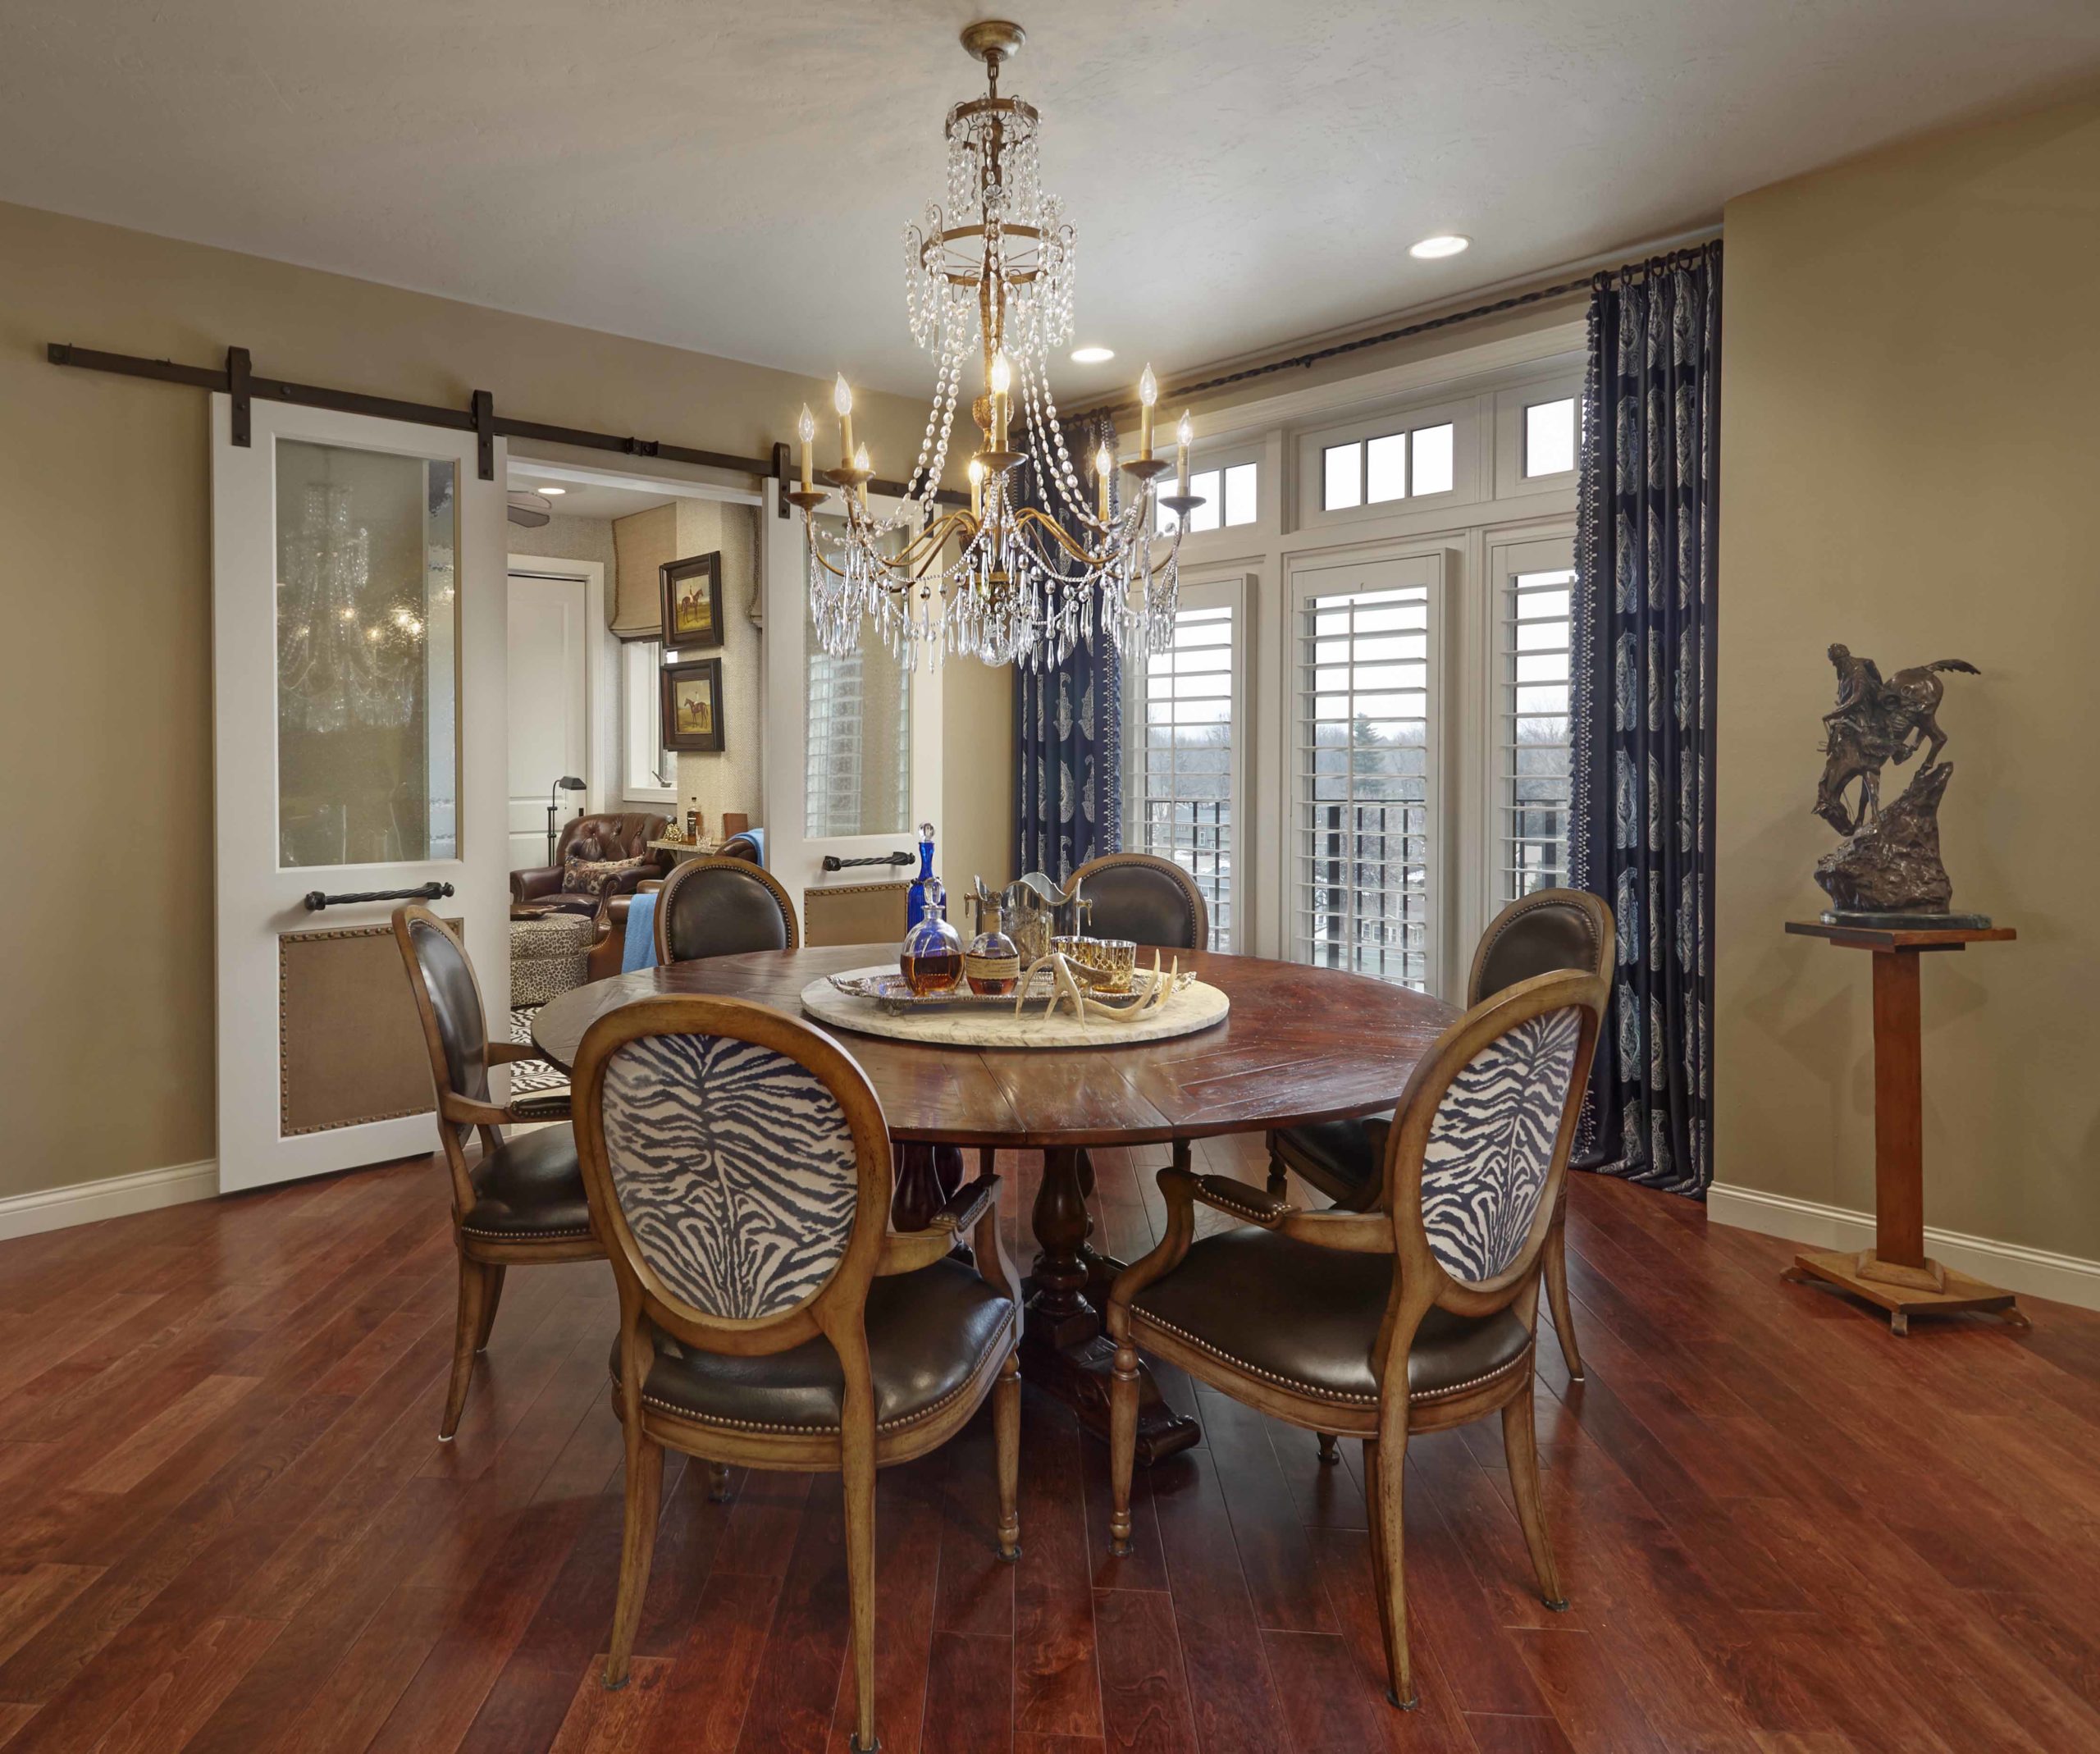 Dining room with round table and zebra print chairs